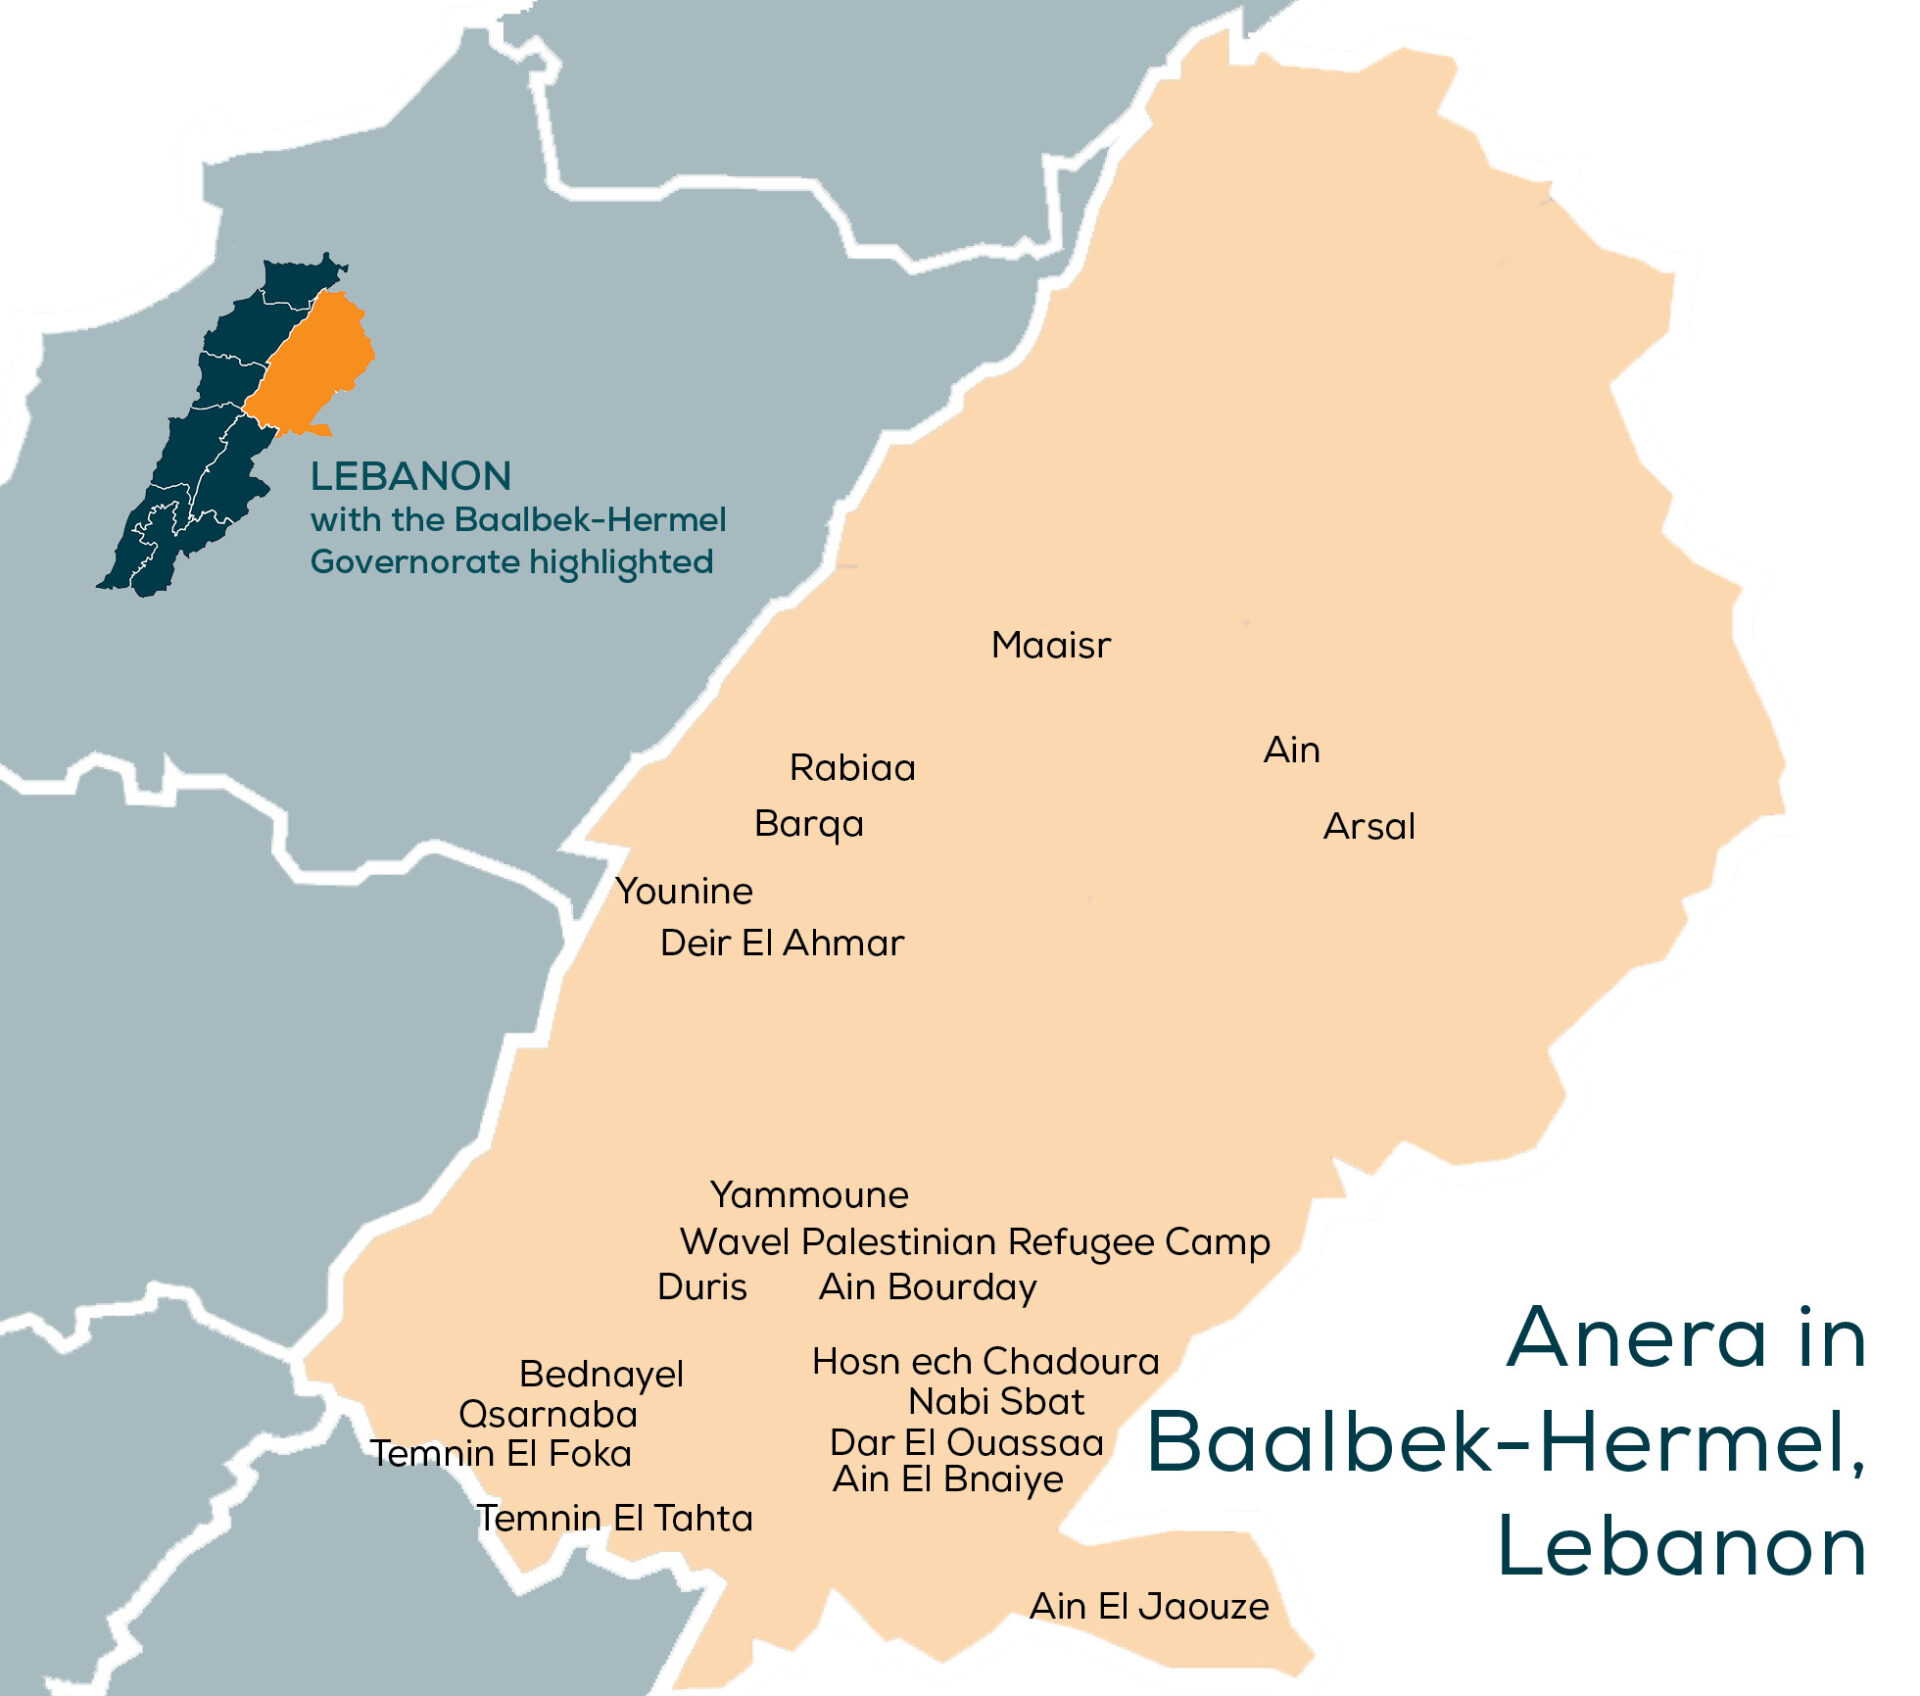 A map of the places where Anera ha worked in the Baalbek-Hermel Governorate of Lebanon.